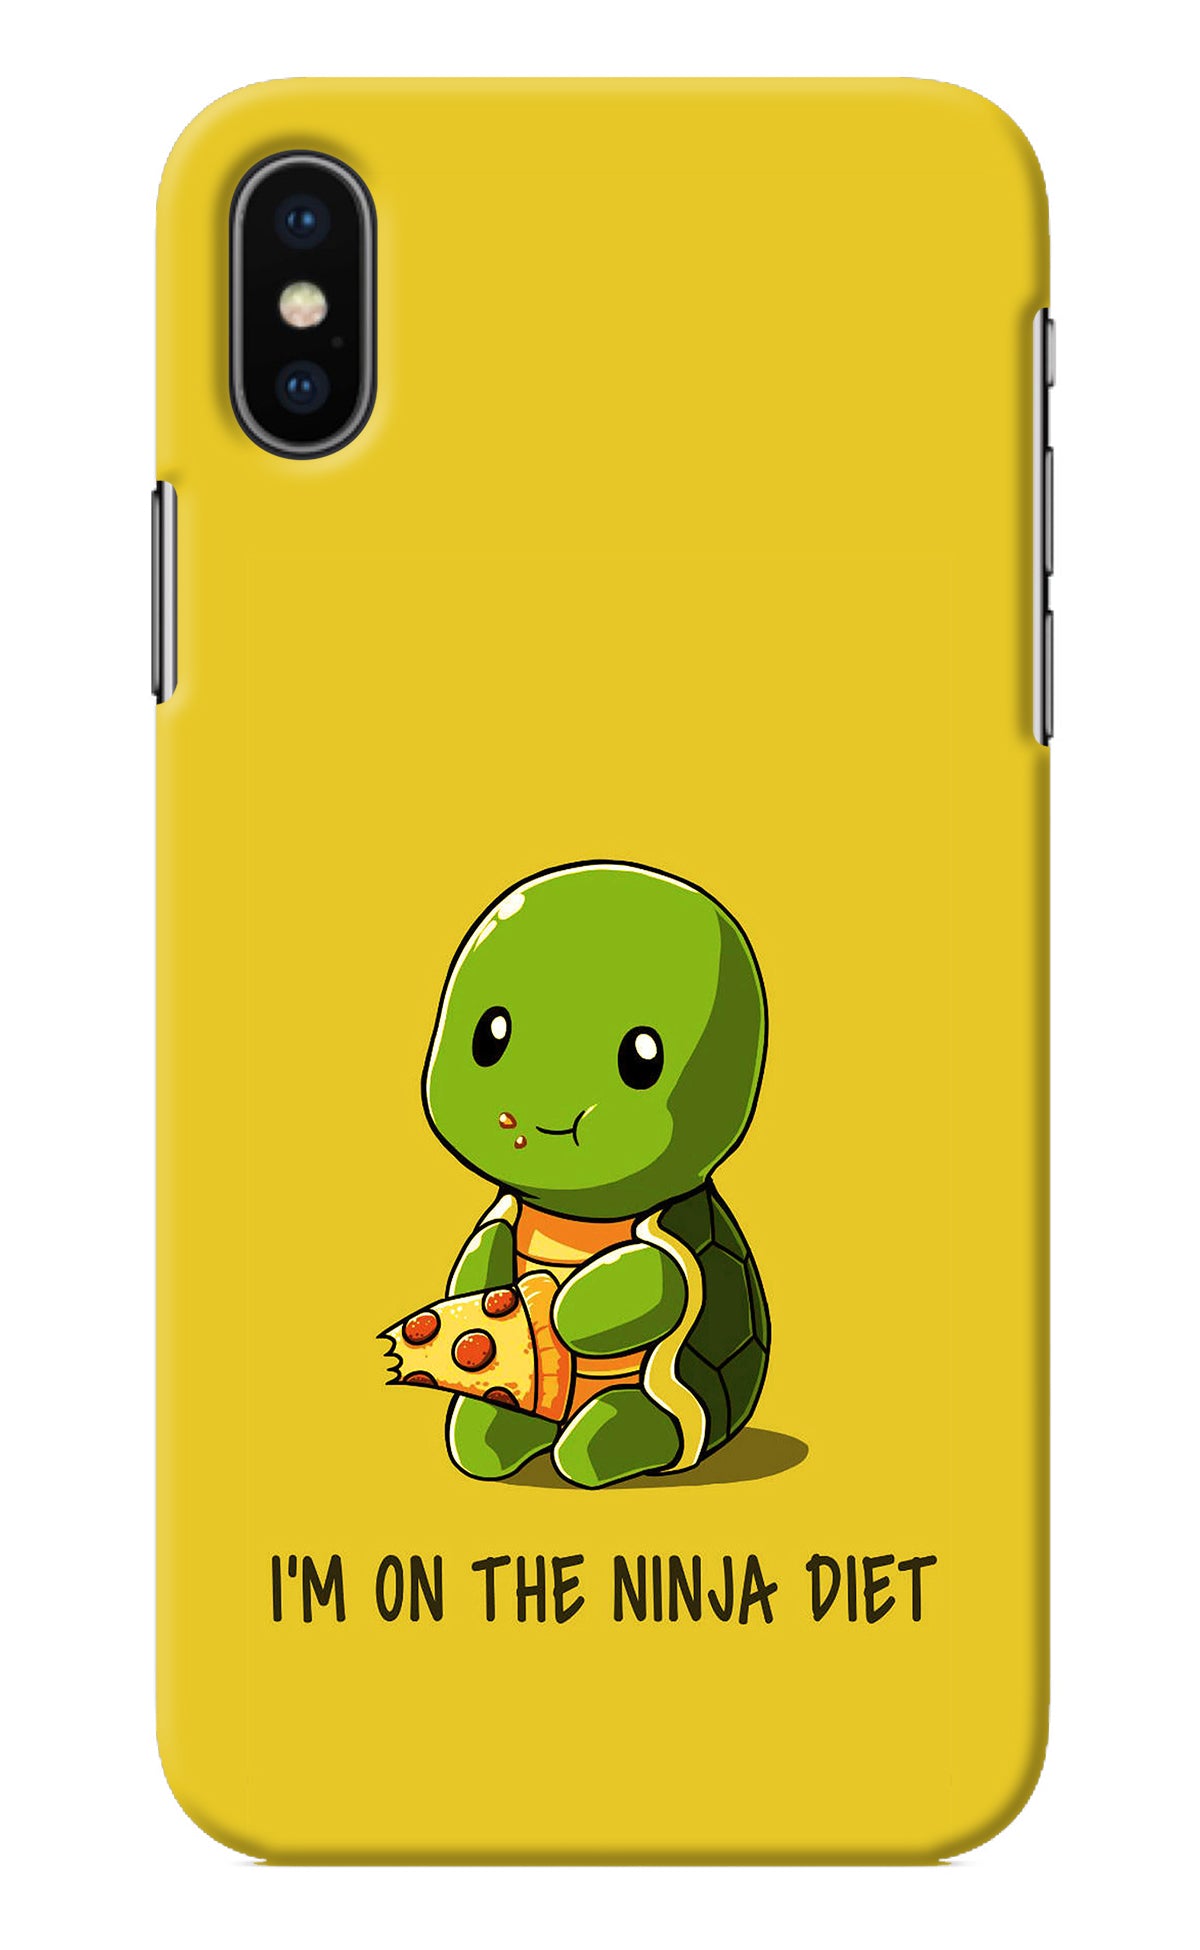 I'm on Ninja Diet iPhone XS Back Cover